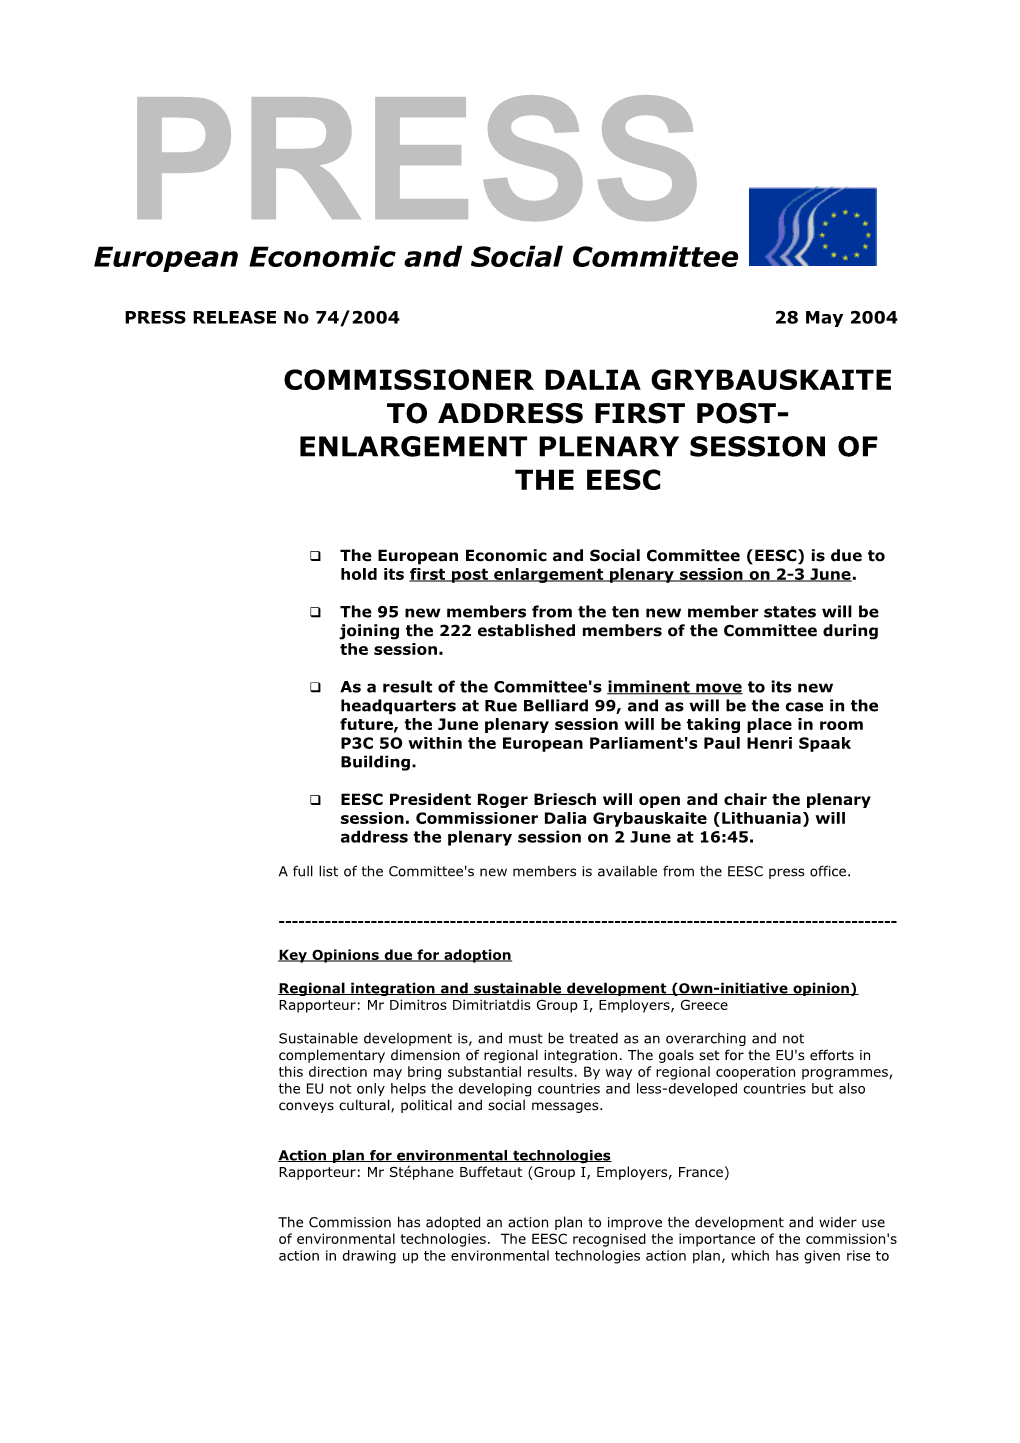 Commissioner Dalia Grybauskaite to Address First Post-Enlargement Plenary Session of the Eesc